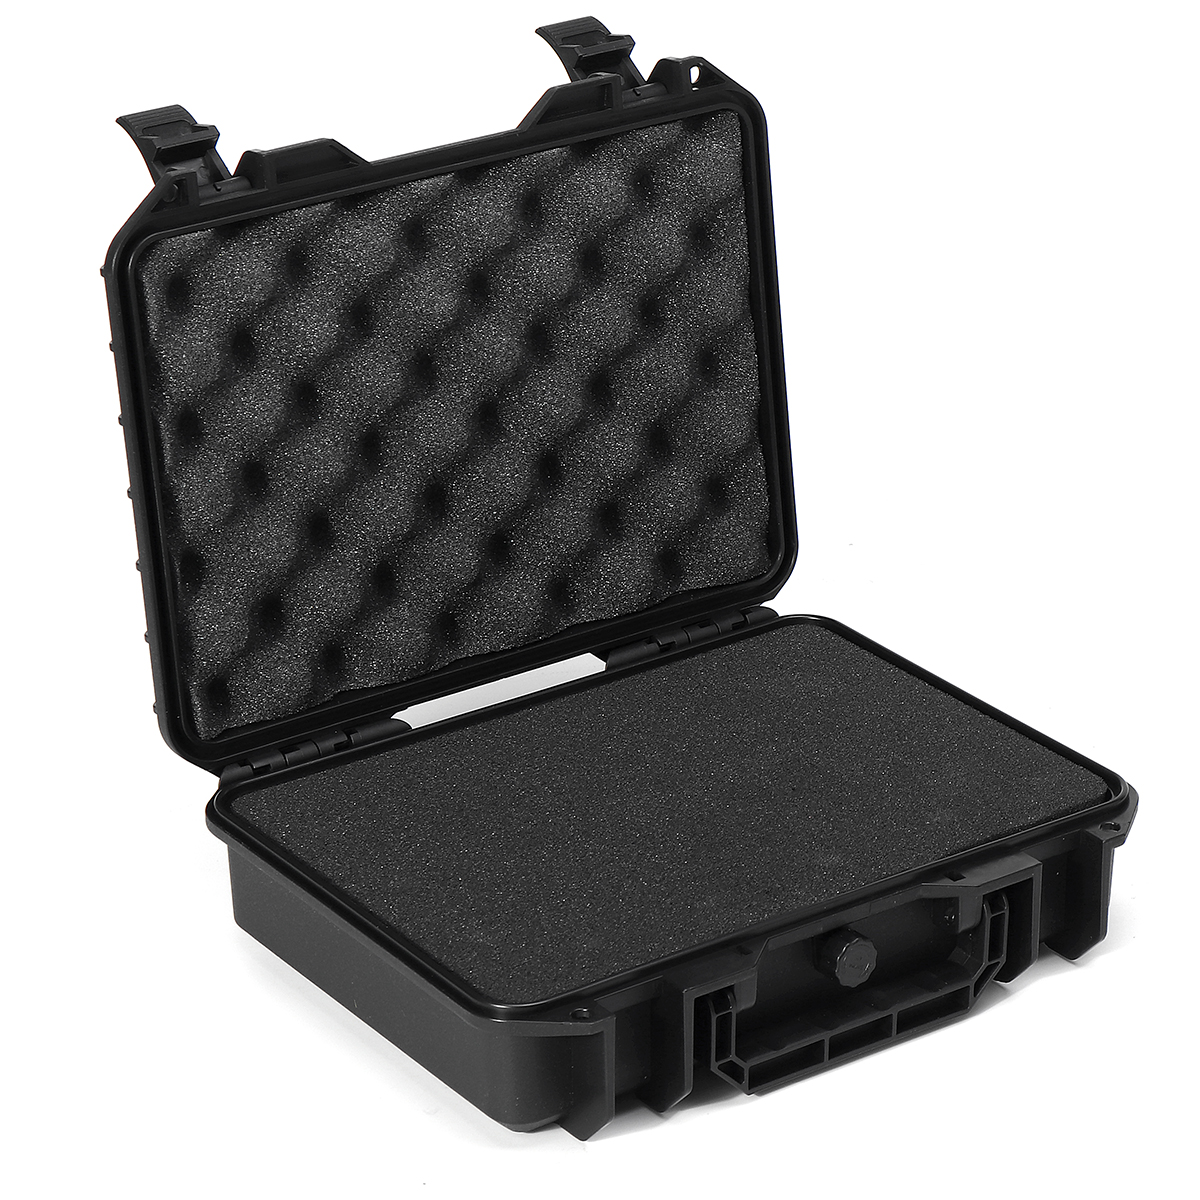 Waterproof-Hard-Carrying-Case-Bag-Tool-Storage-Box-Camera-Photography-with-Sponge-1664833-3